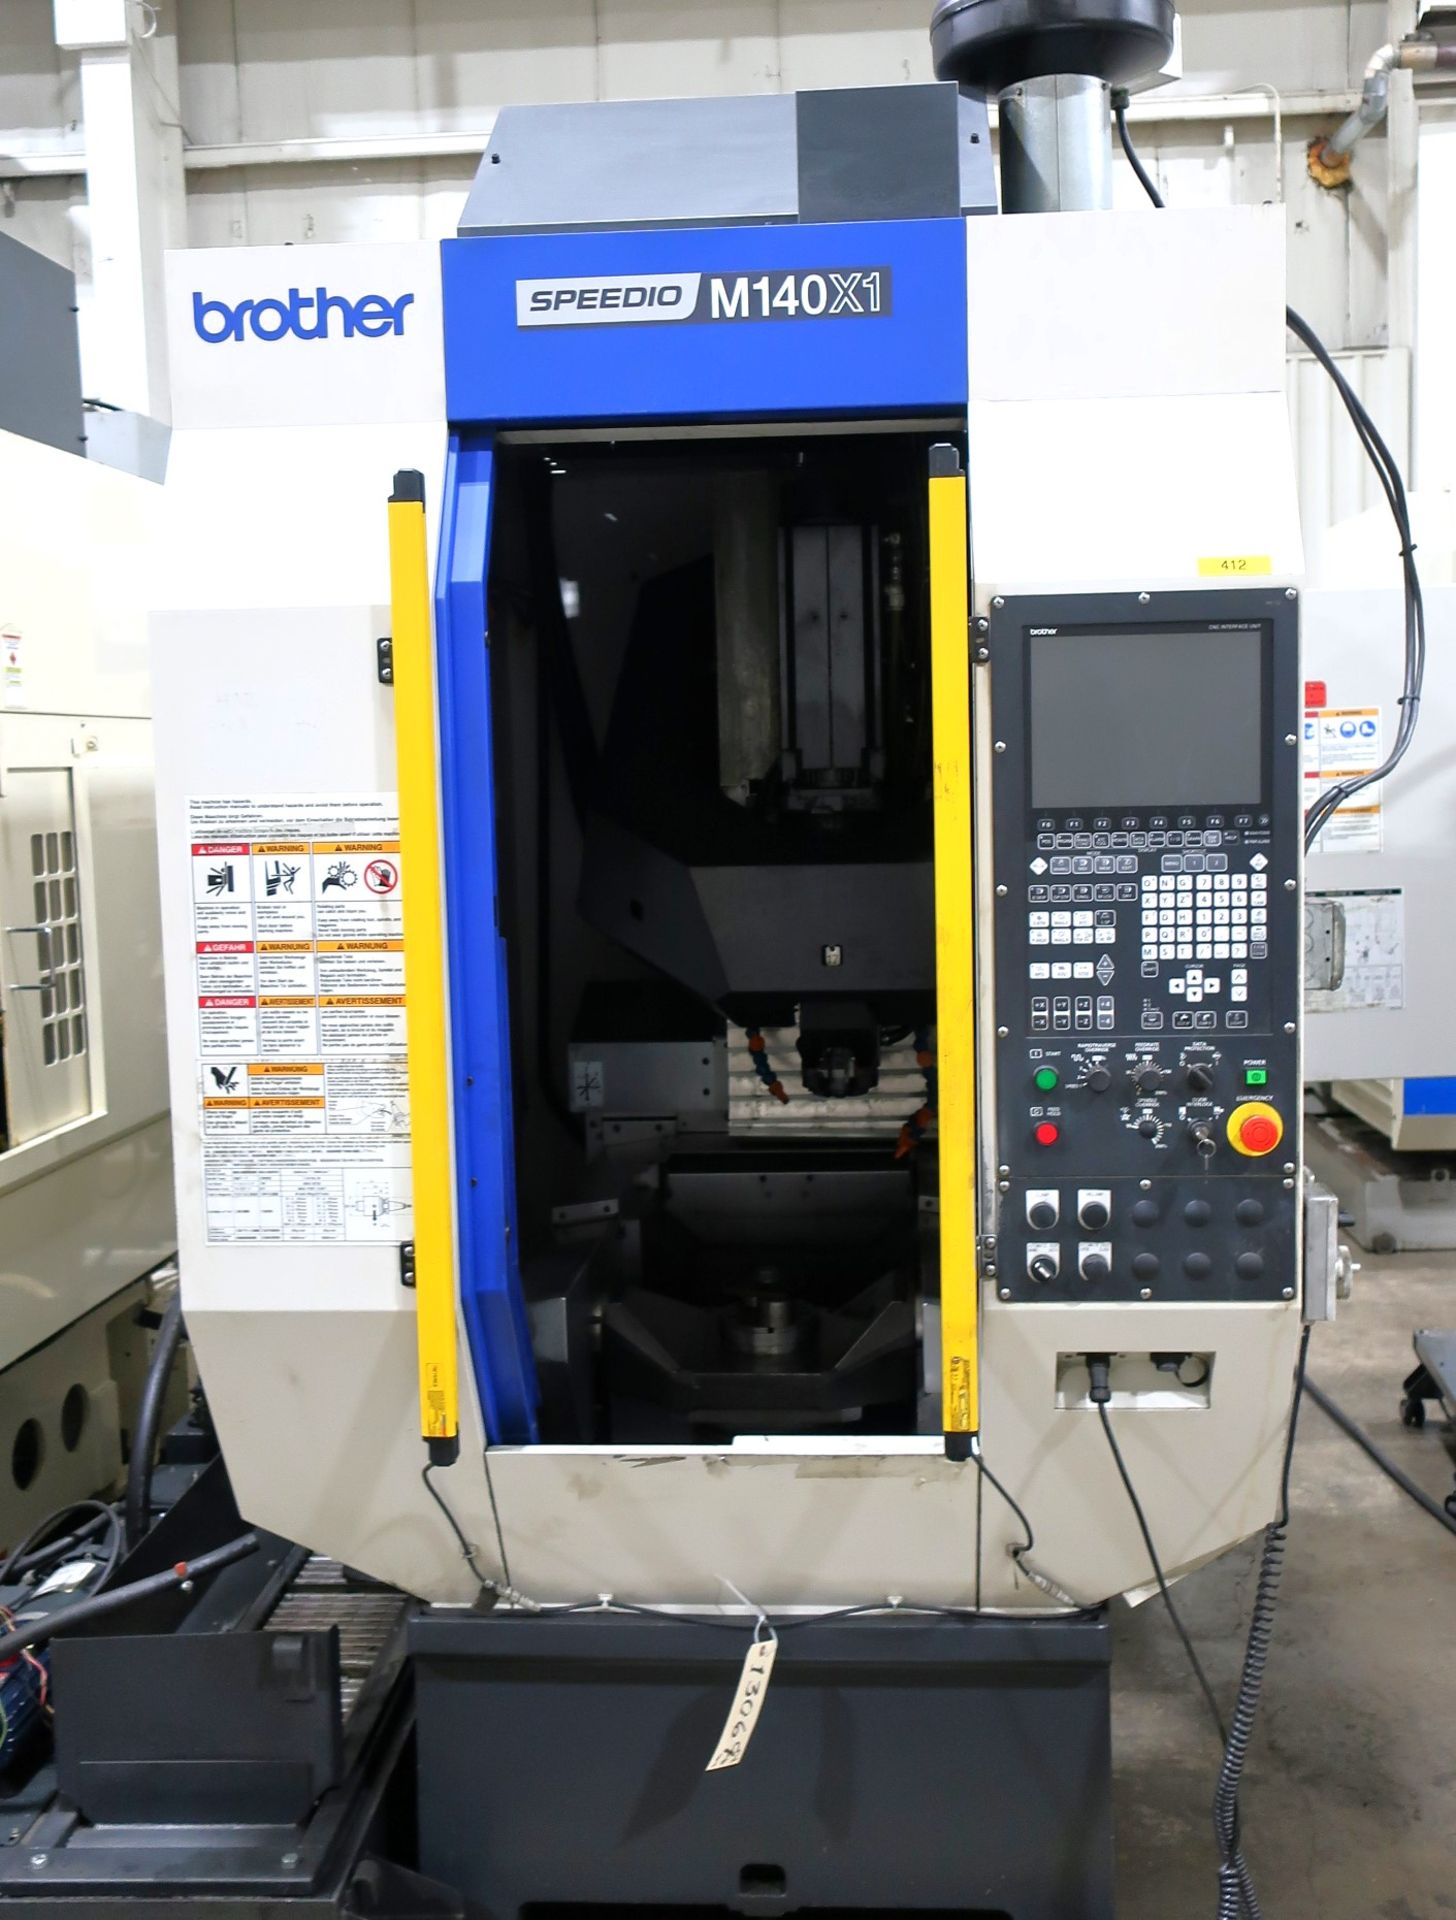 BROTHER SPEEDIO M140X1 CNC 5-AXIS MULTITASKING DRILL TAP TURNING CENTER, S/N 111357, NEW 2015